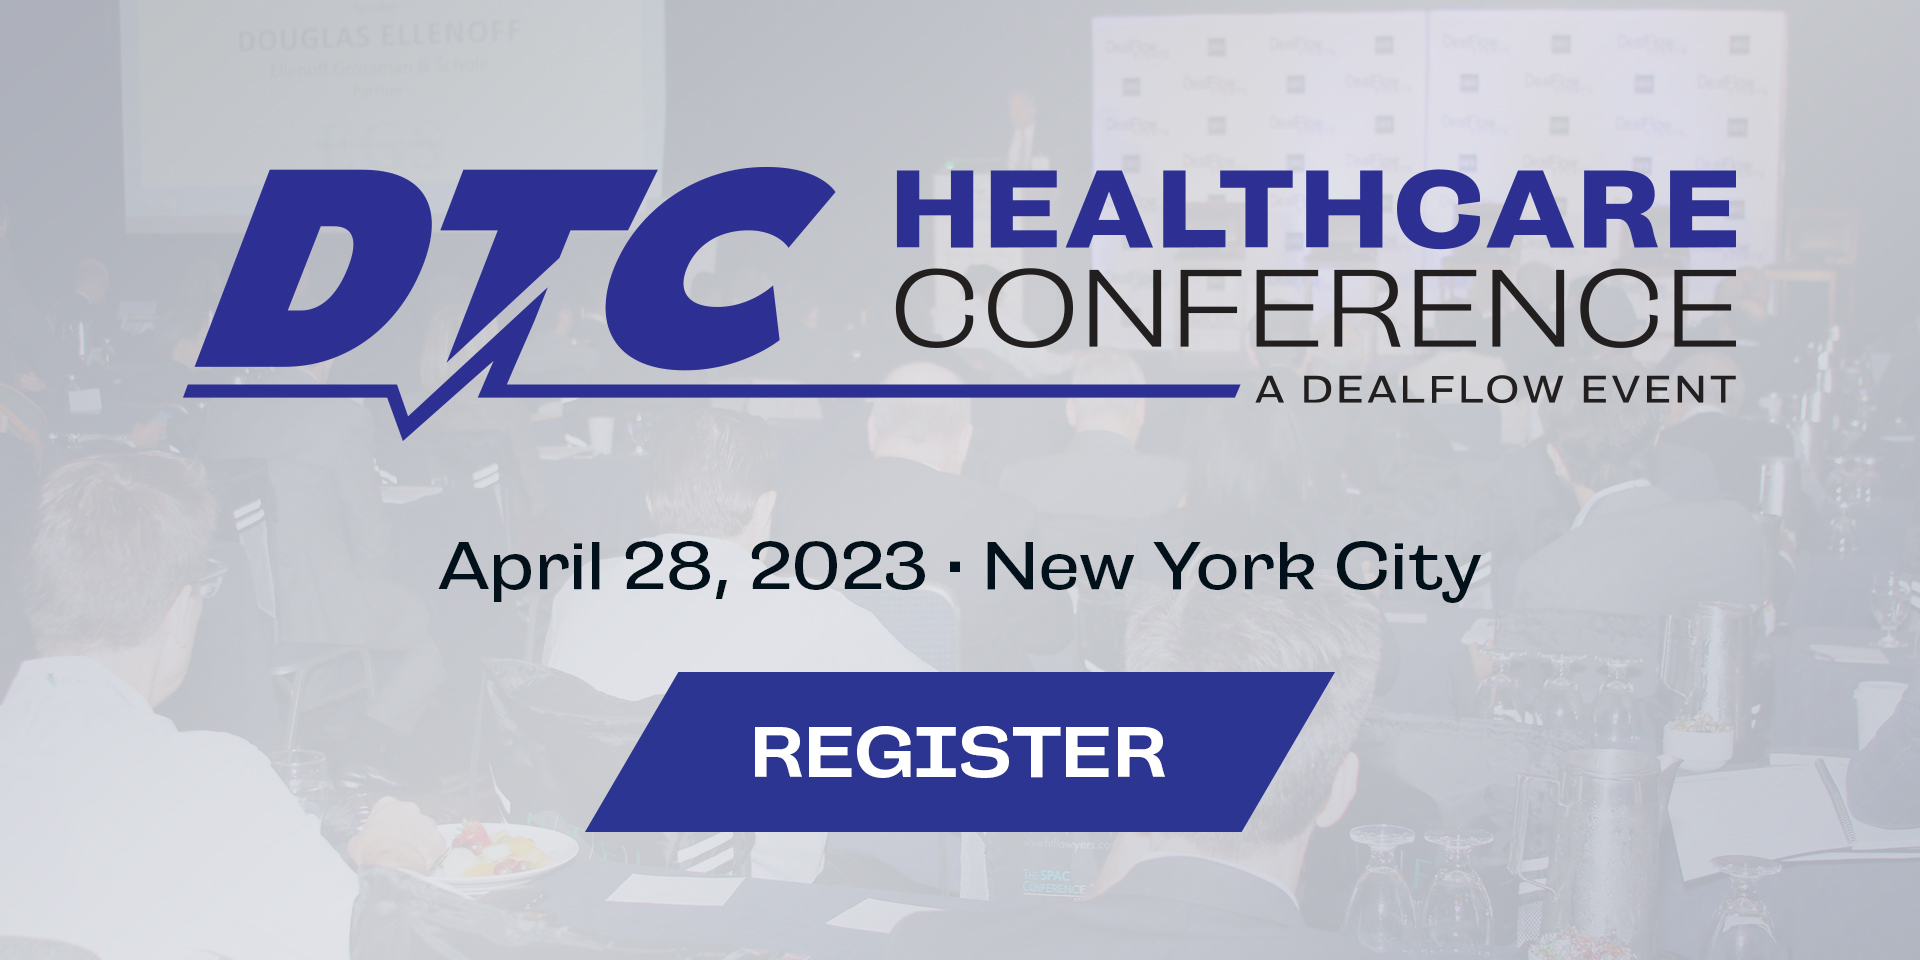 The DTC Healthcare Conference April 28, 2023 NYC